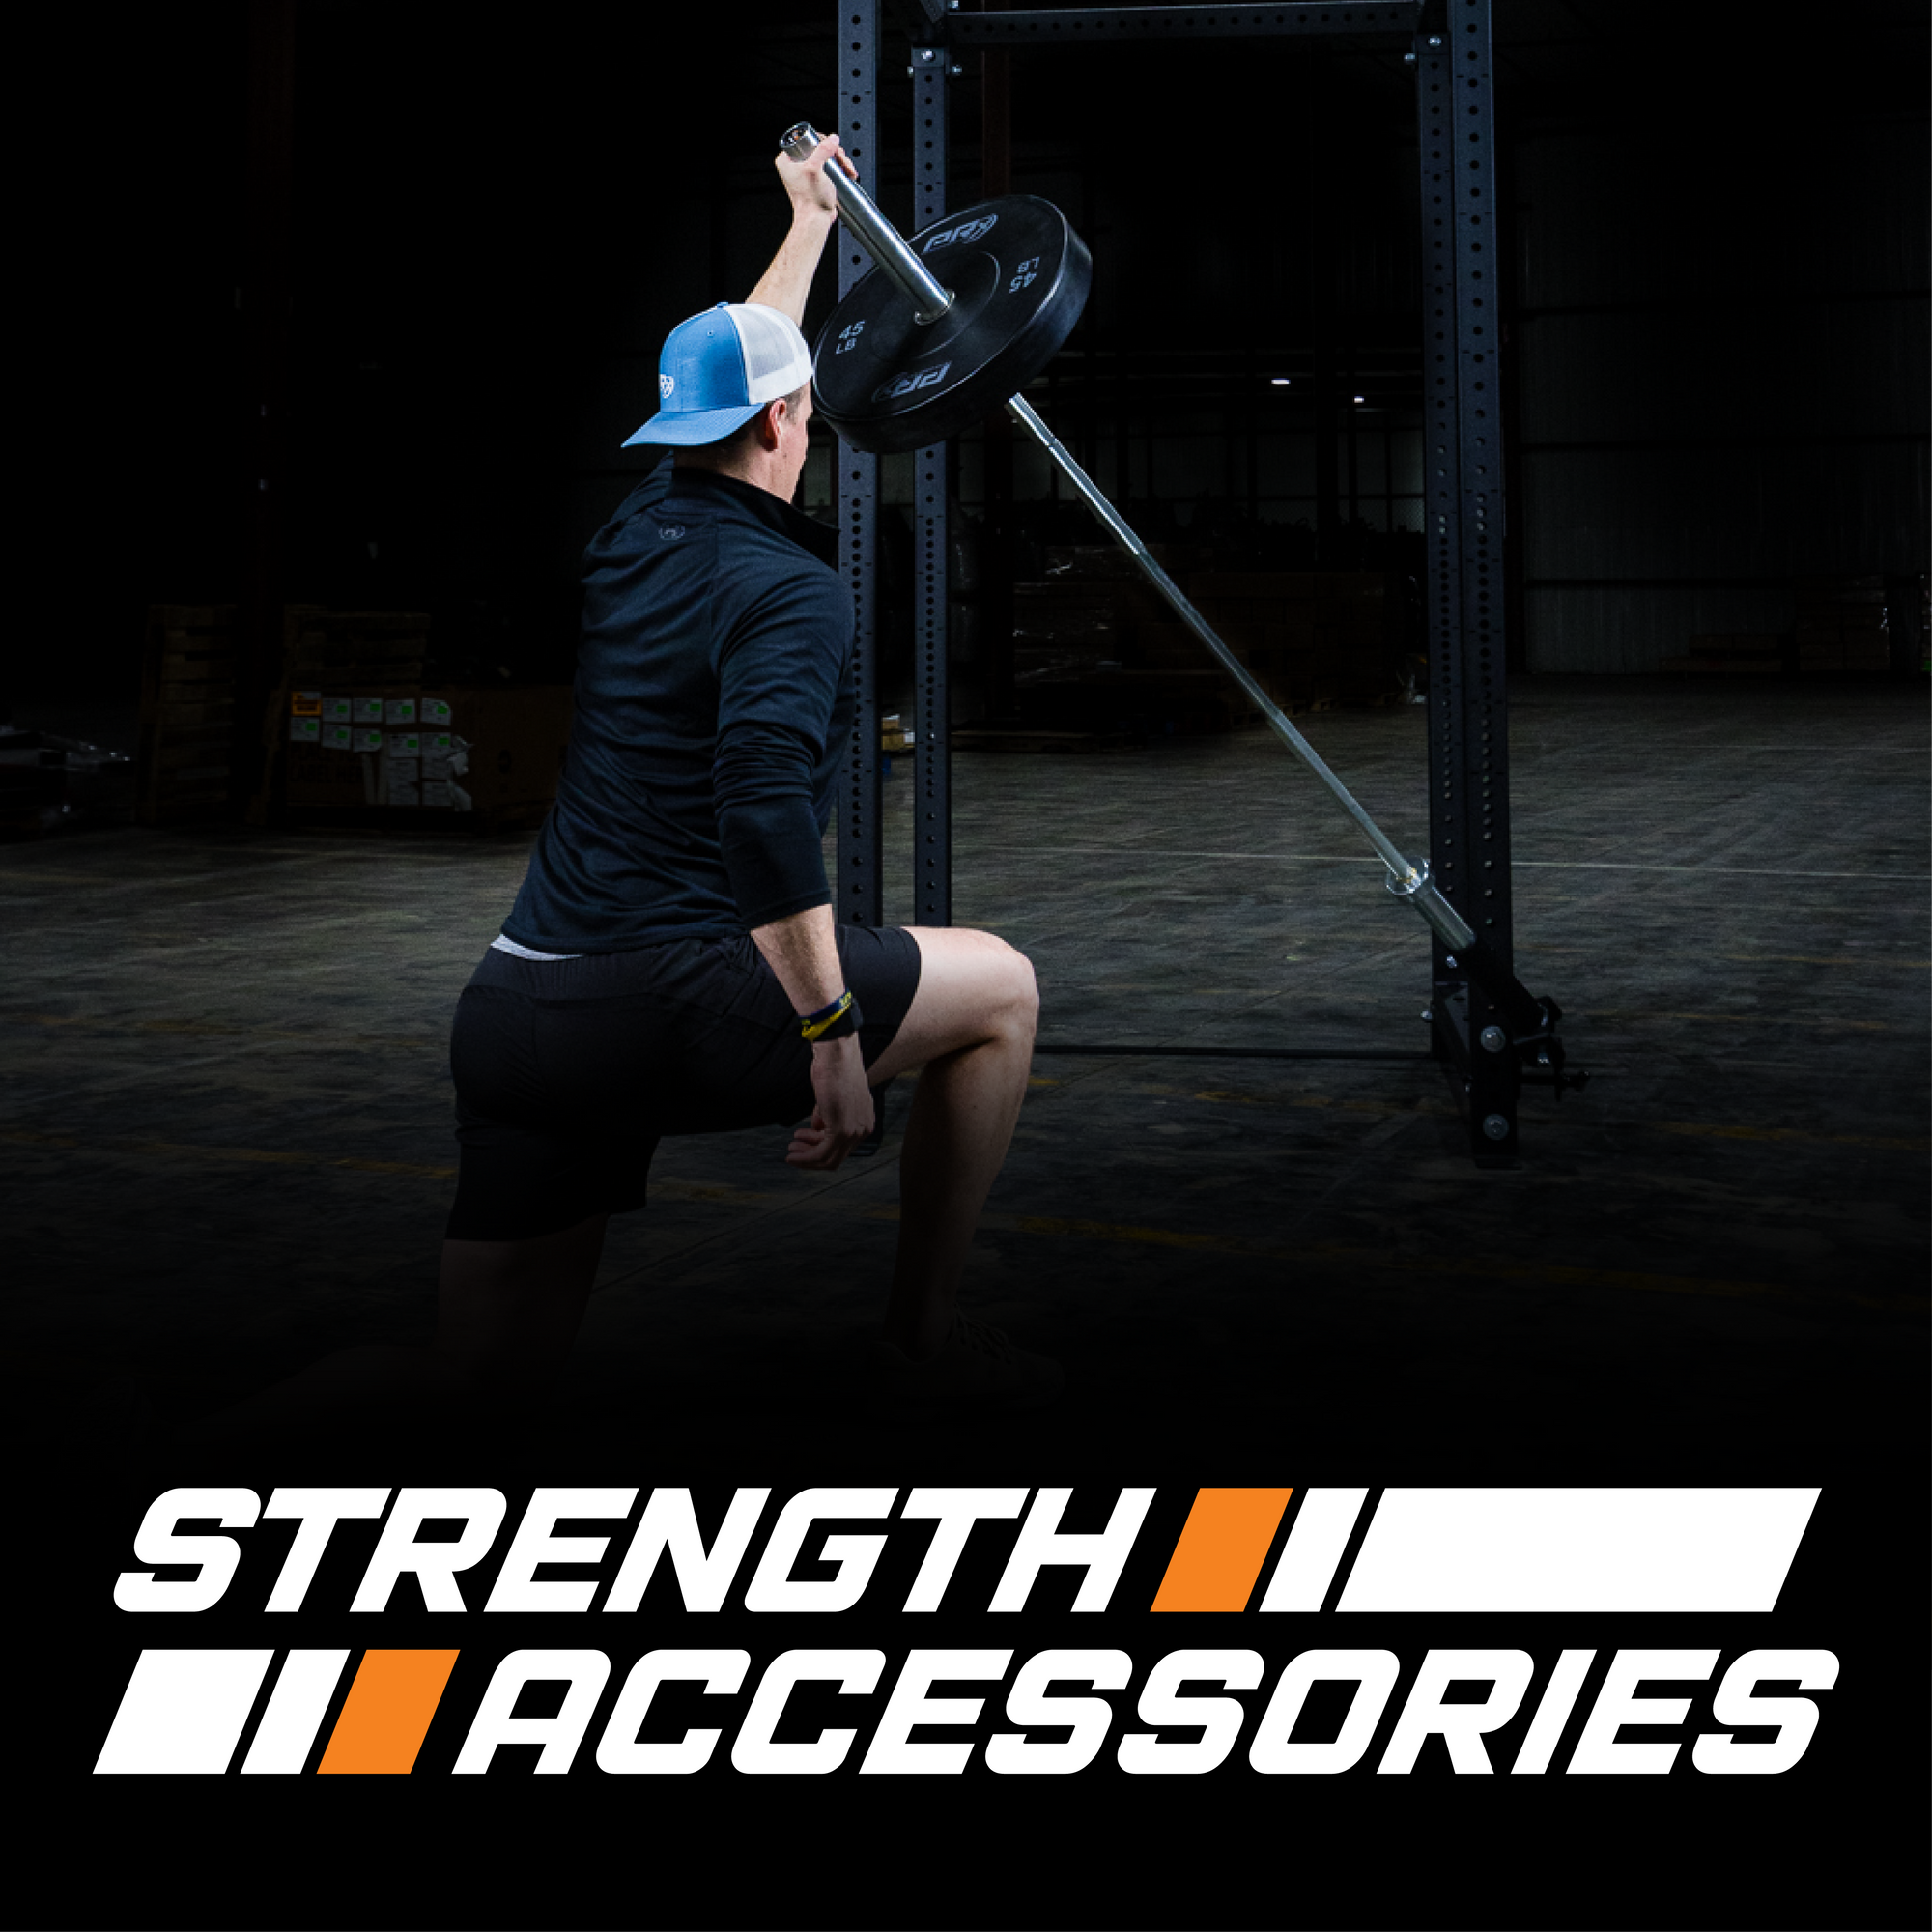 Discover Your Home Gym's Potential with PRx Strength Accessories